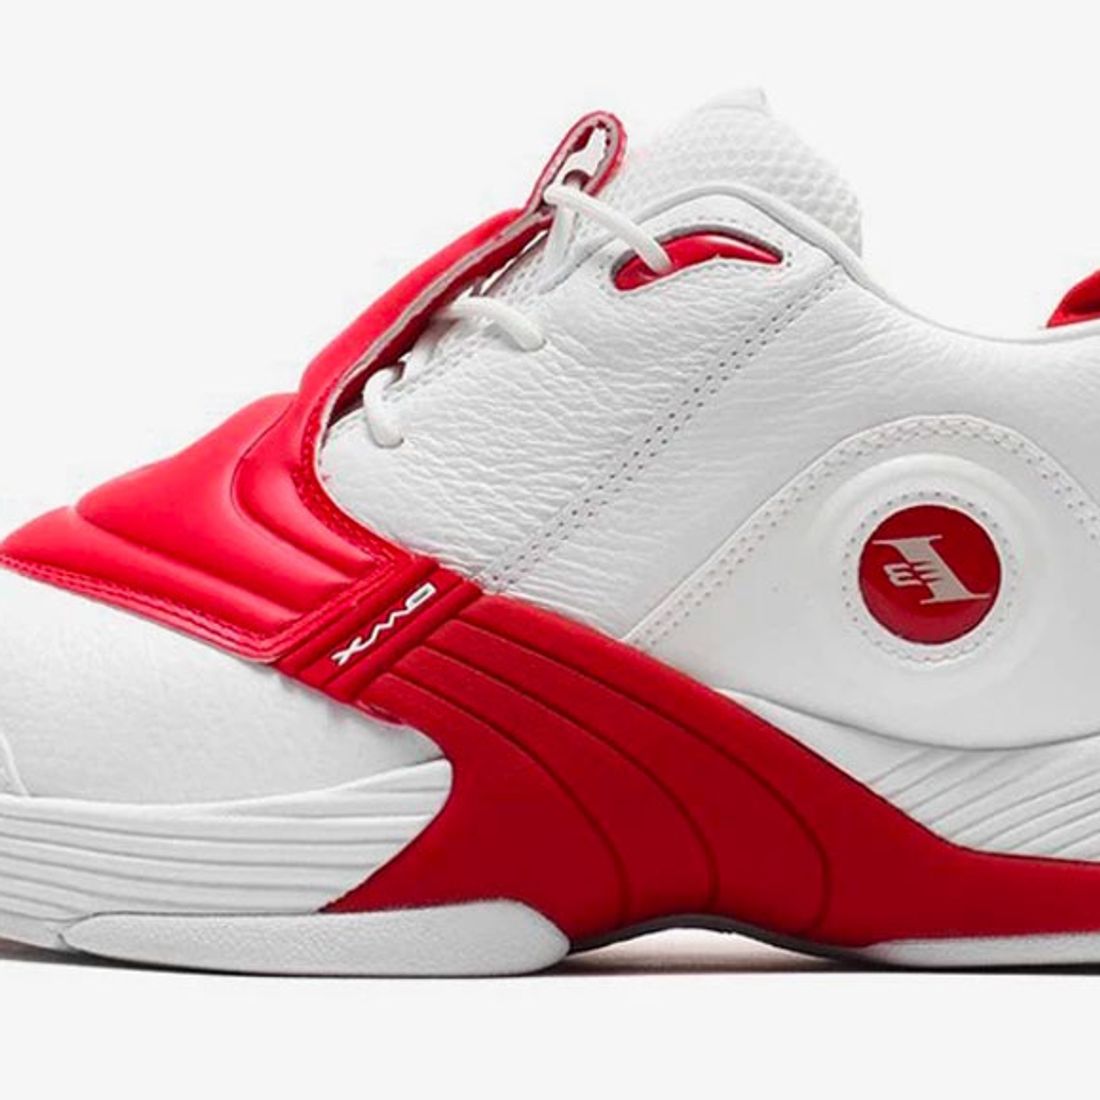 Reebok to Release I3 Legacy Collection of All Allen Iverson Signature Shoes, SneakerNews.com